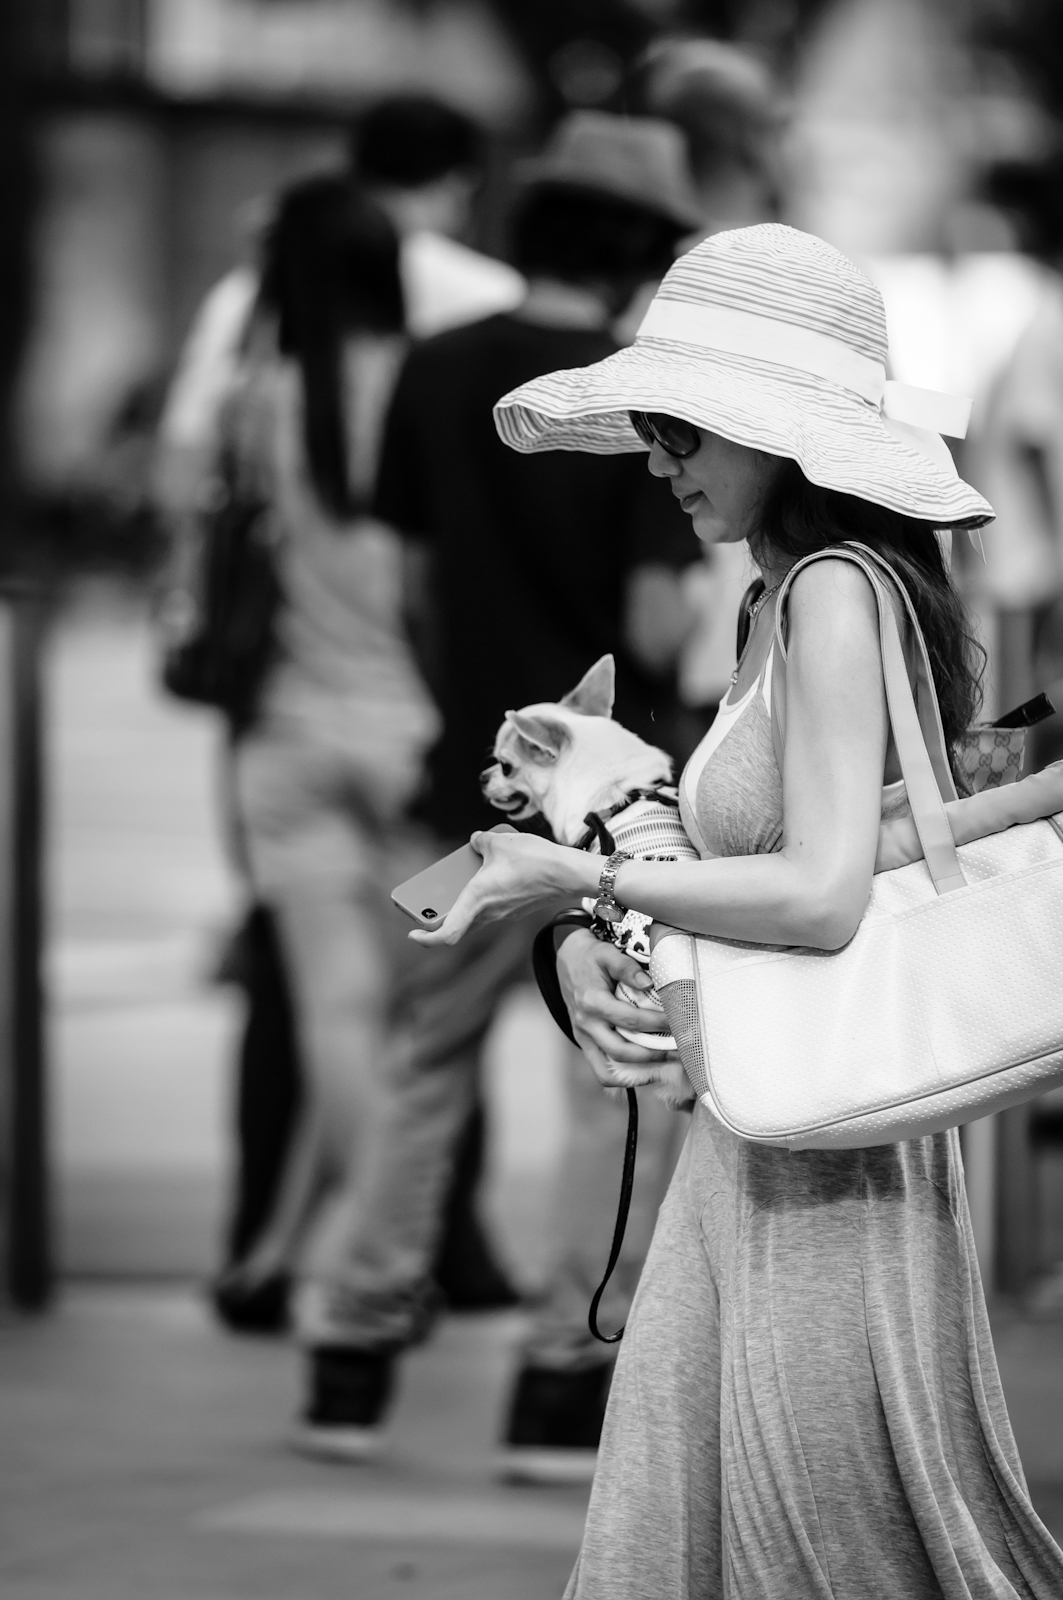 Street photography - Lady wearing a hat and carrying a toy dog